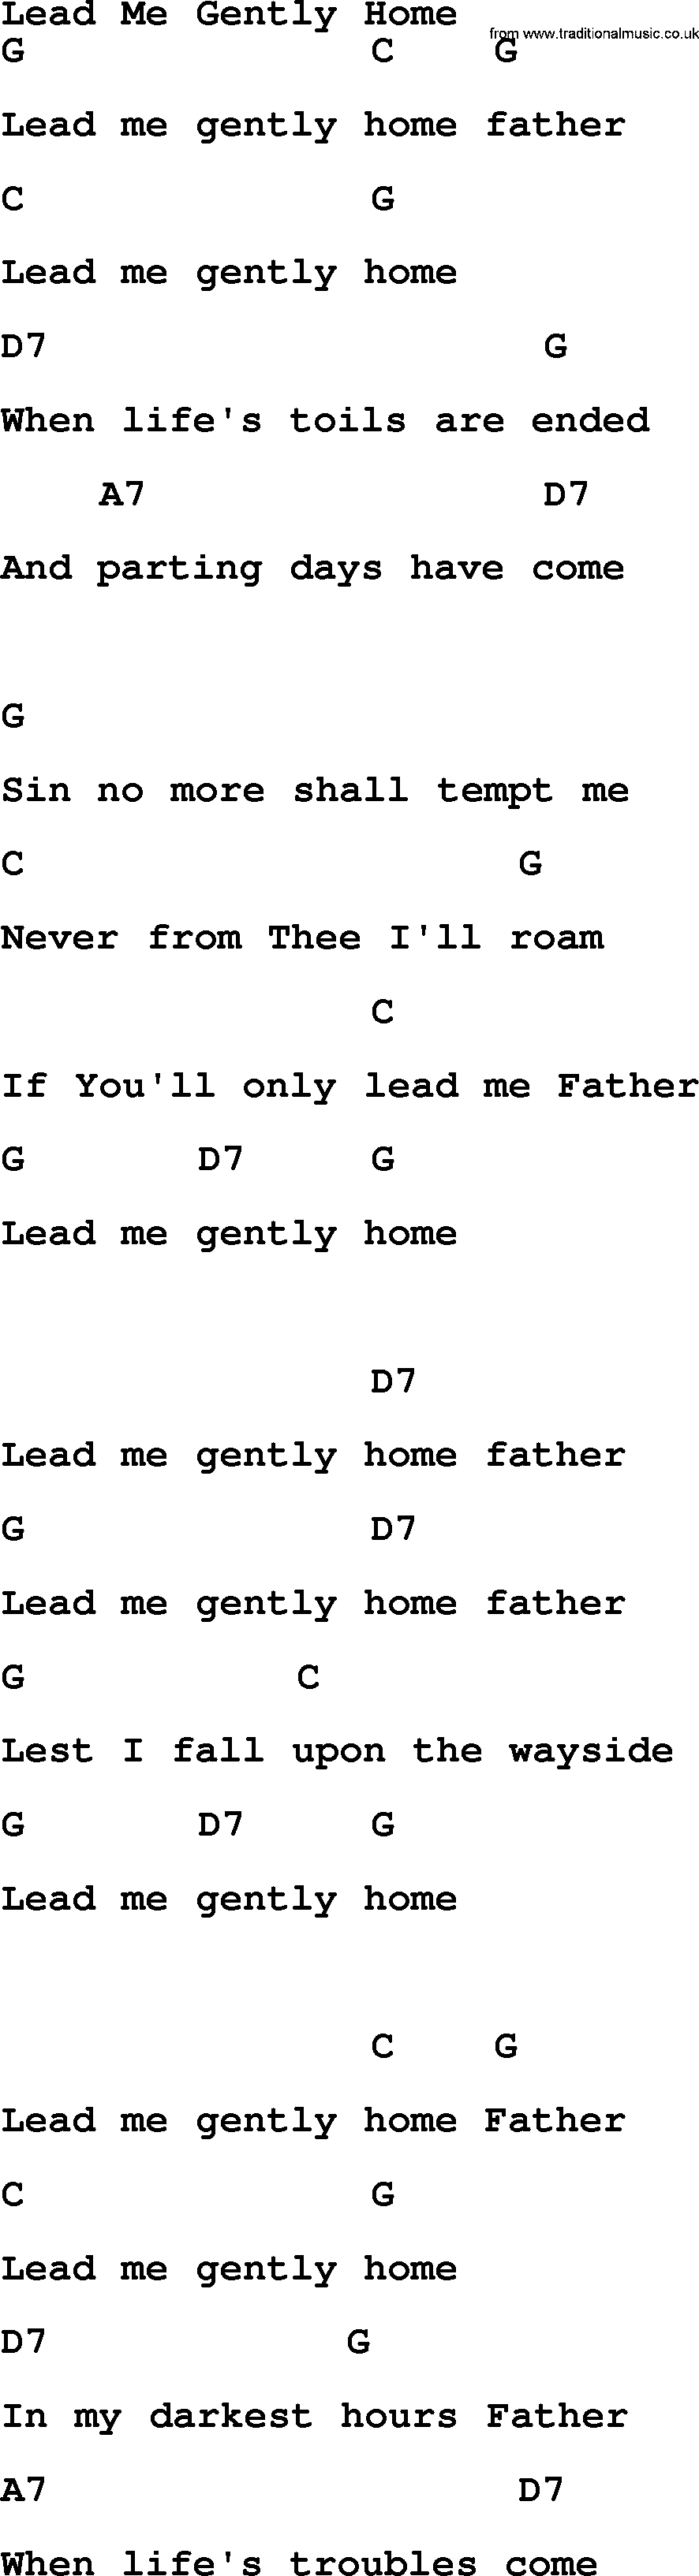 Bluegrass song: Lead Me Gently Home, lyrics and chords